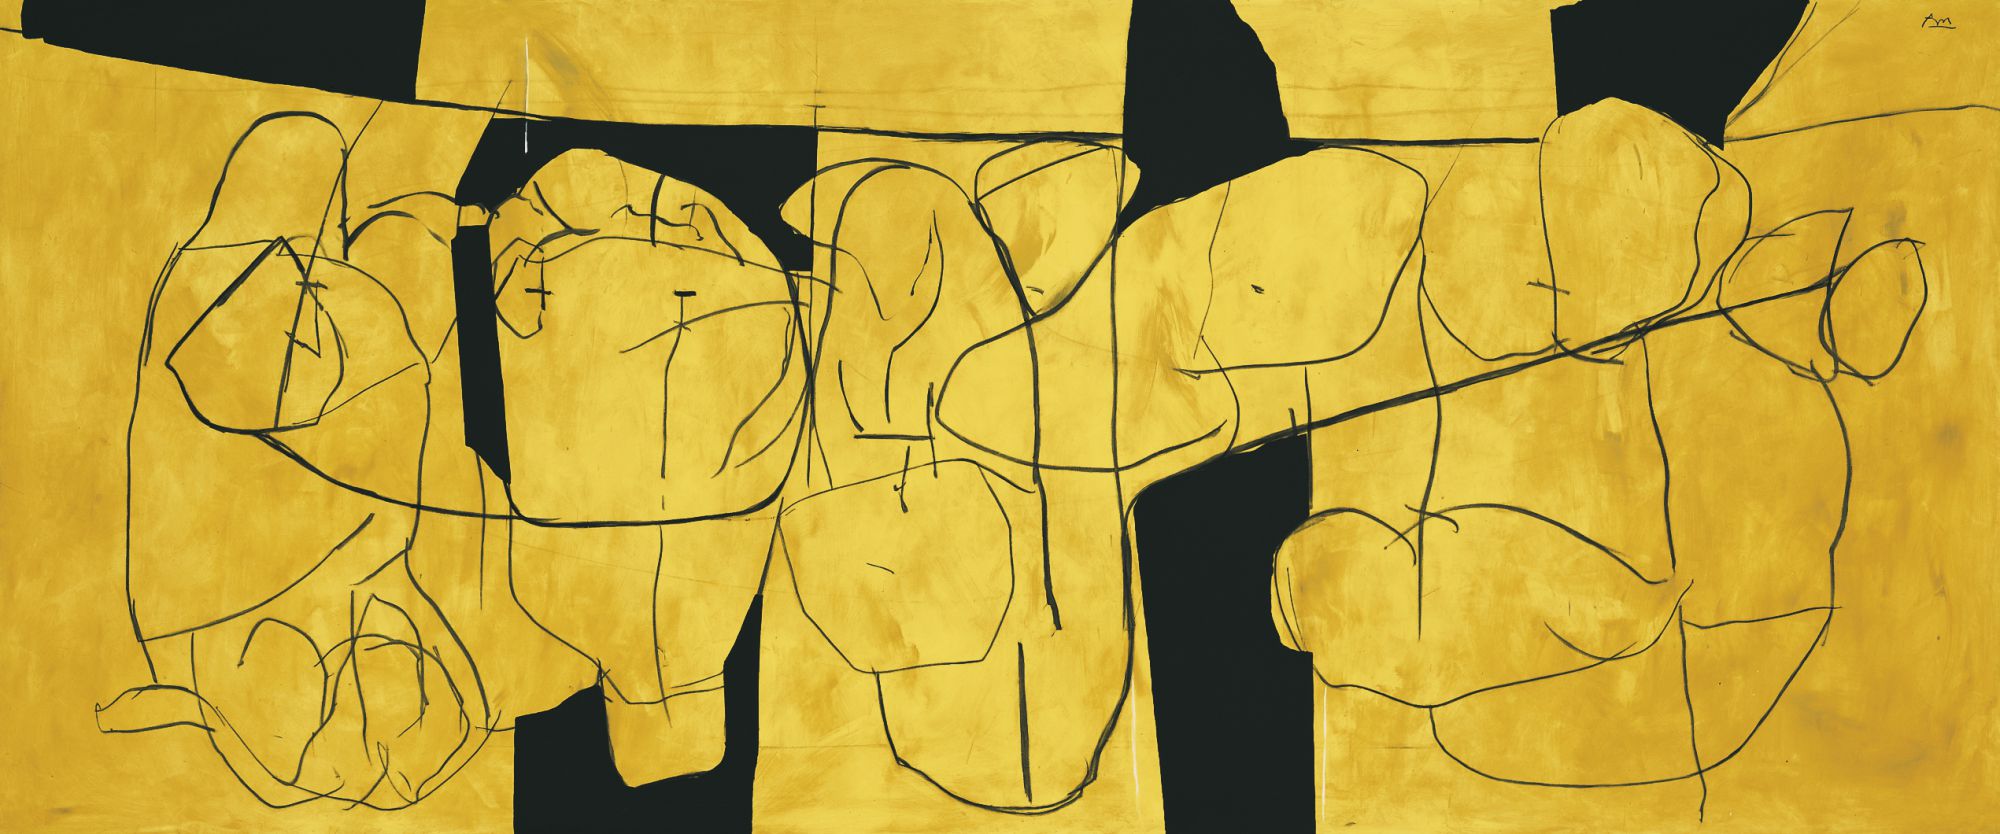 Golden Bough, 1986, acrylic and charcoal on canvas, 90 ✕ 216 in. (228.6 ✕ 548.6 cm)